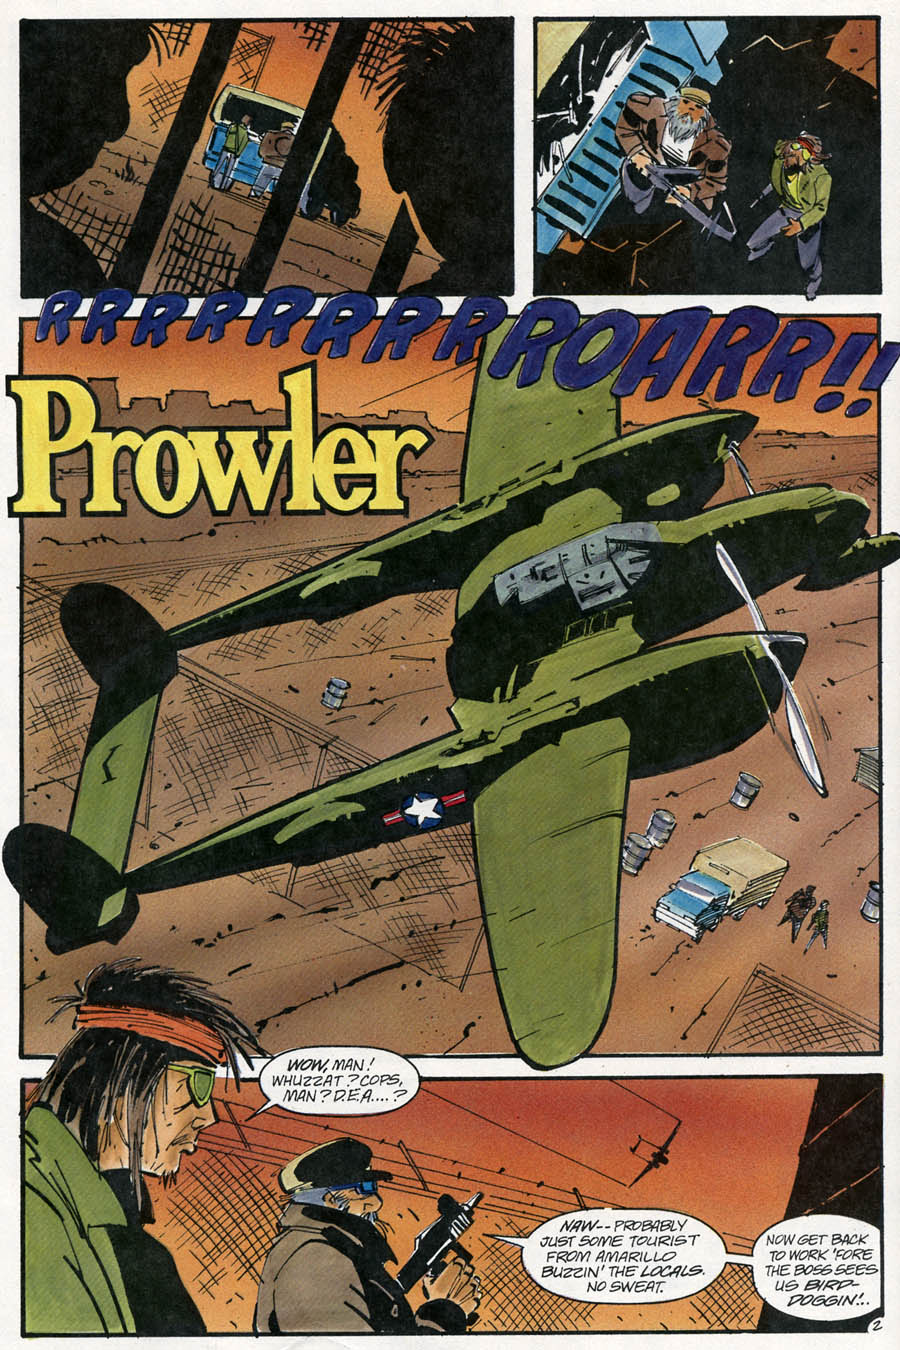 Read online Revenge of the Prowler comic -  Issue #3 - 4